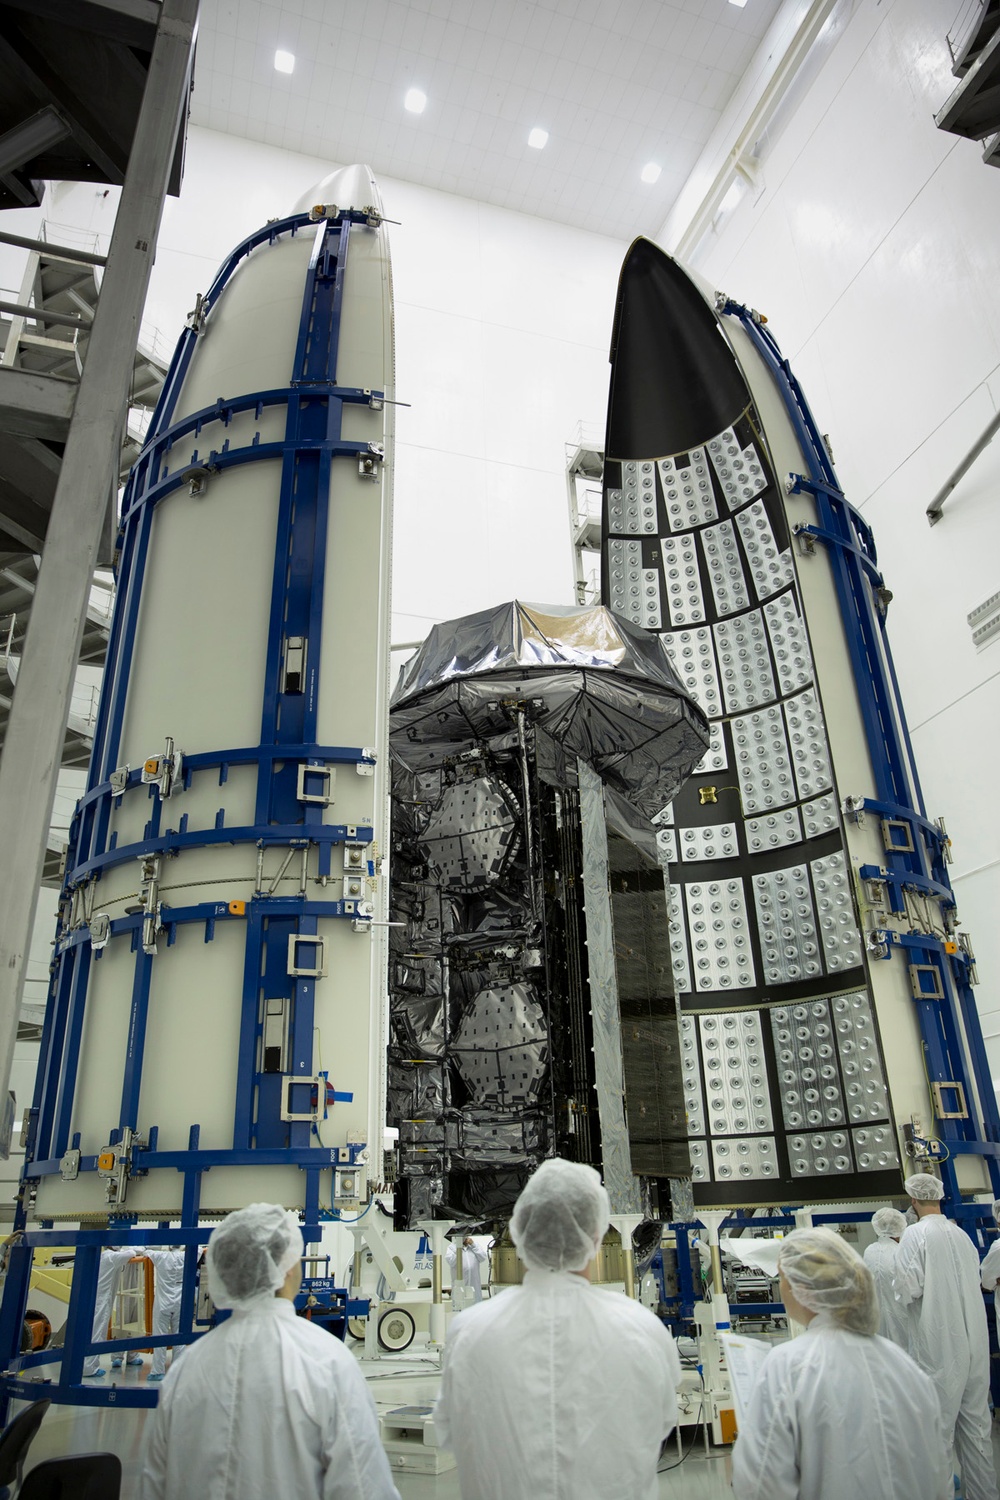 All systems go for Navy’s communications satellite launch Jan. 20